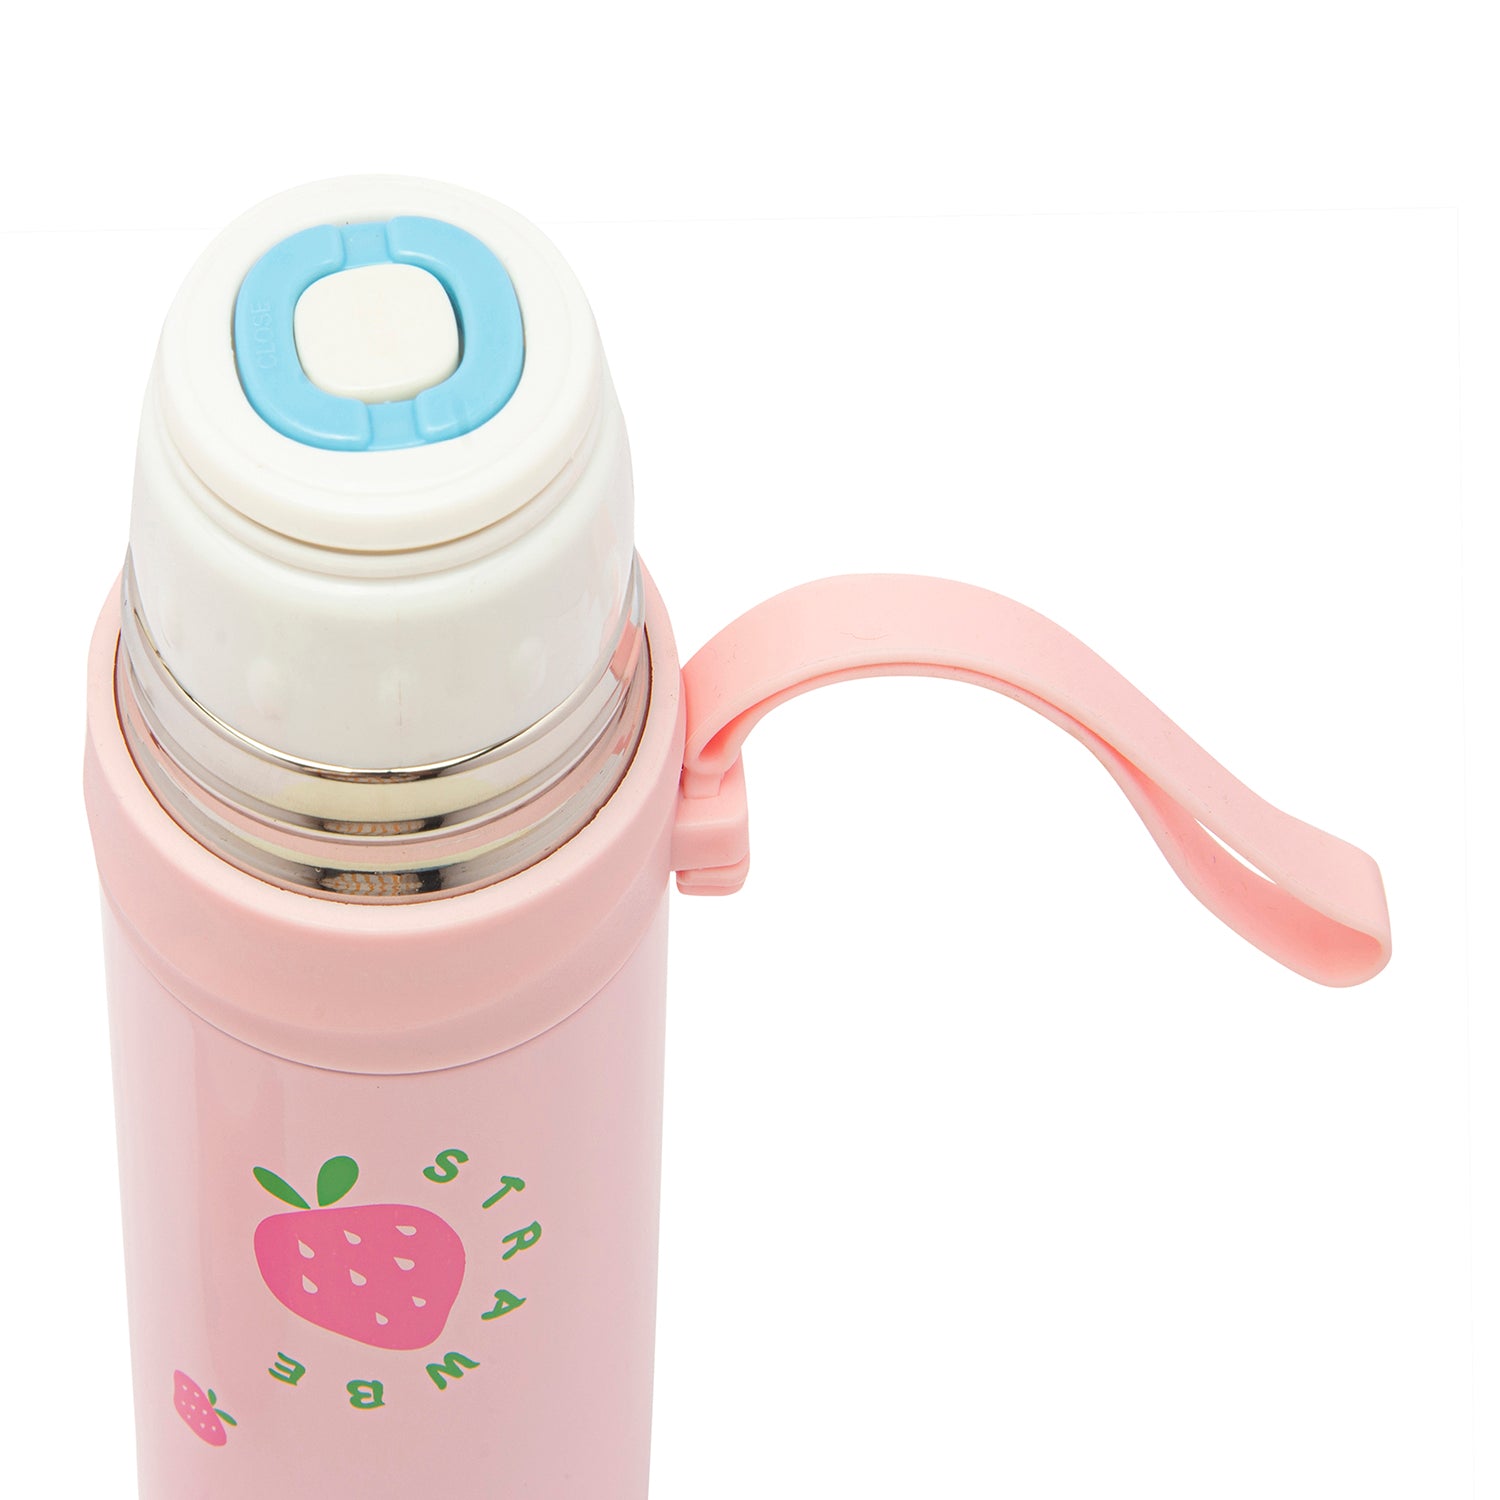 Strawberry Pink 350 ml Stainless Steel Flask - Baby Moo